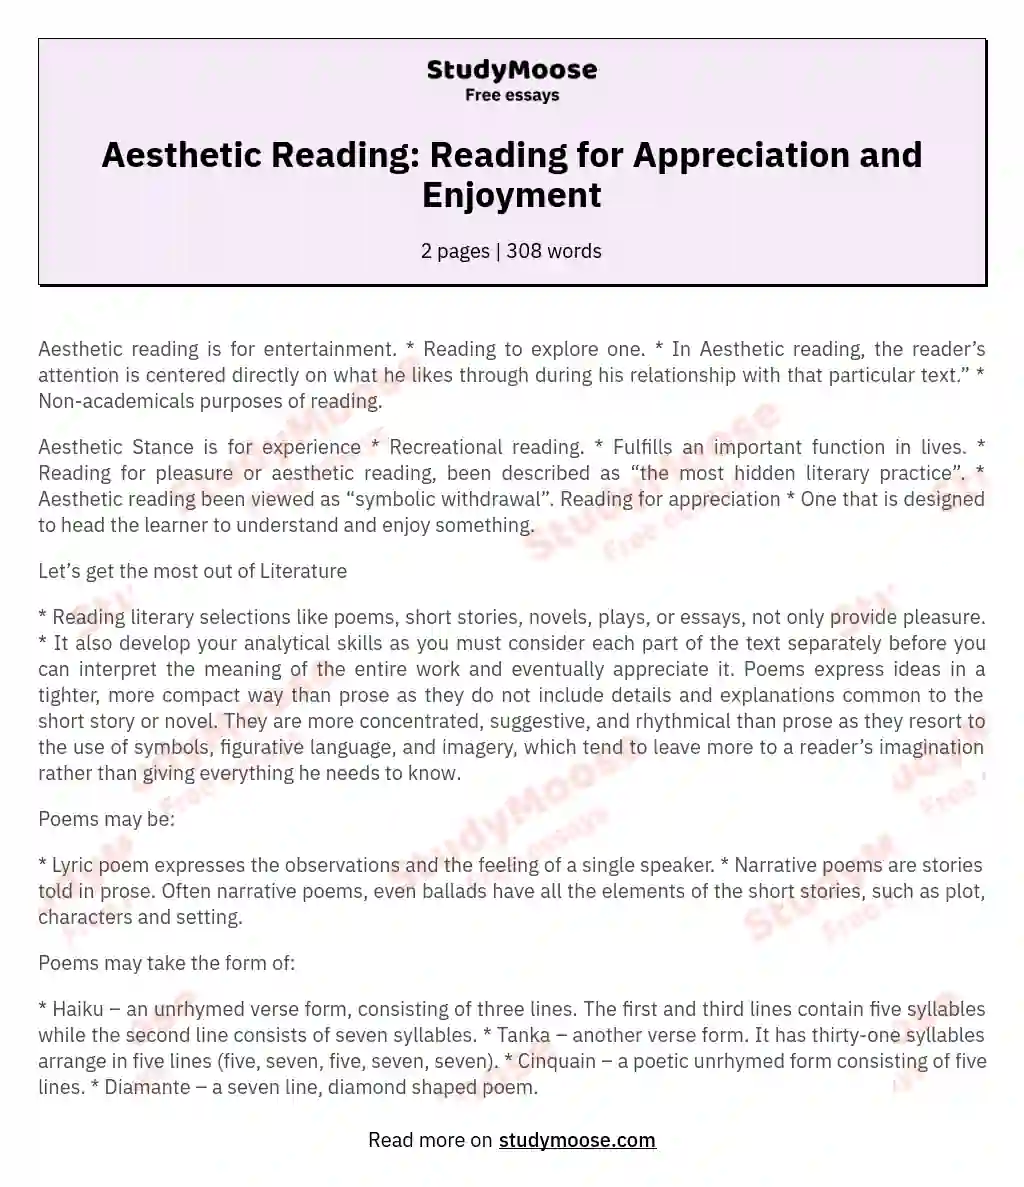 Aesthetic Reading: Reading for Appreciation and Enjoyment